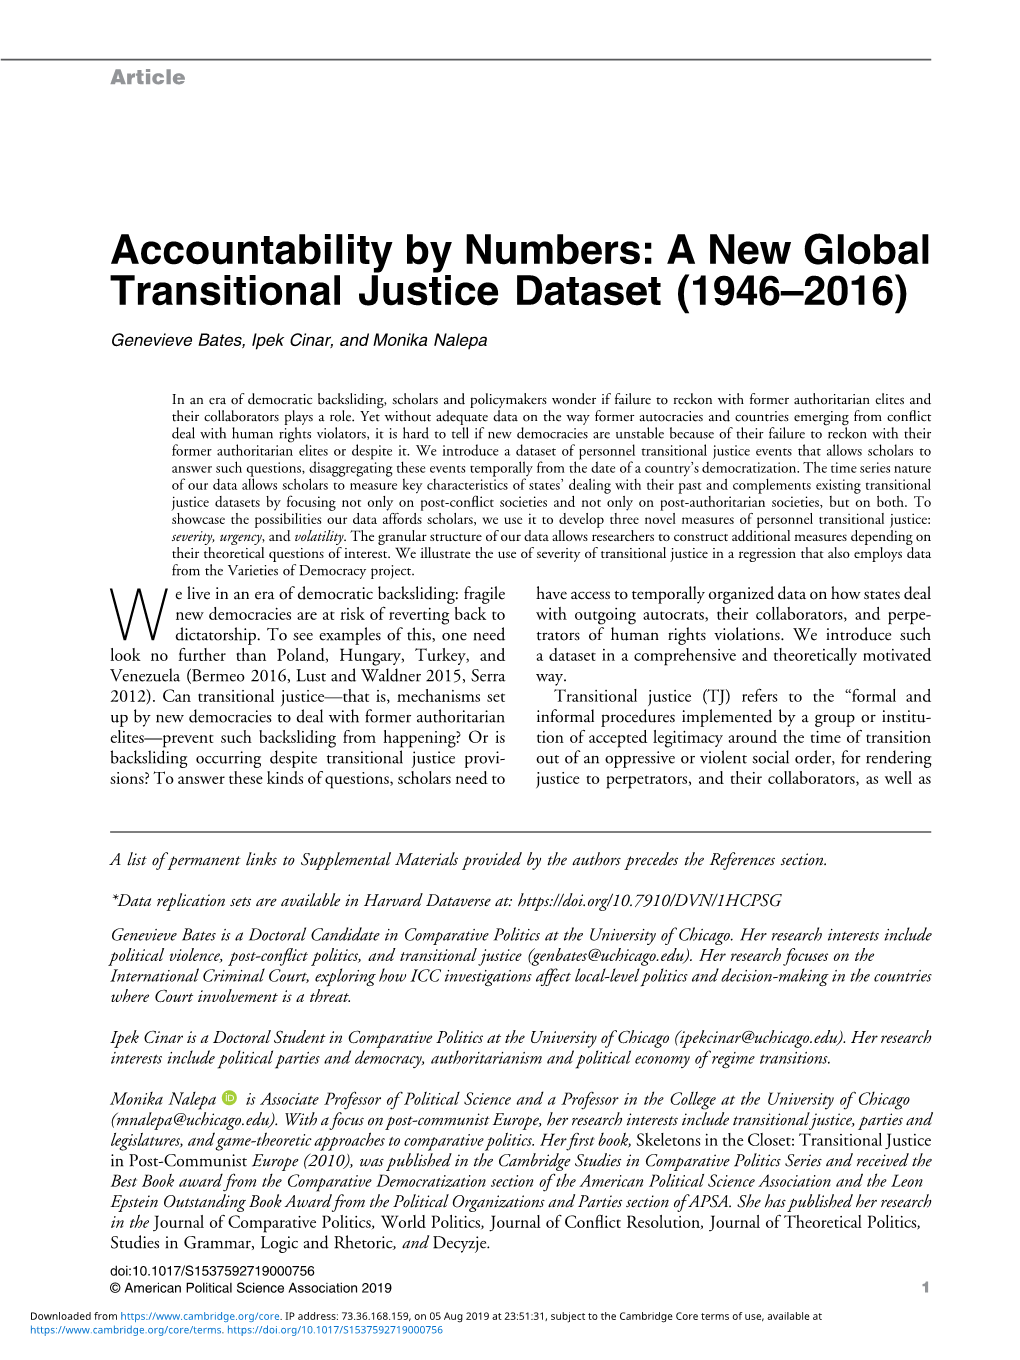 Accountability by Numbers: a New Global Transitional Justice Dataset (1946–2016)